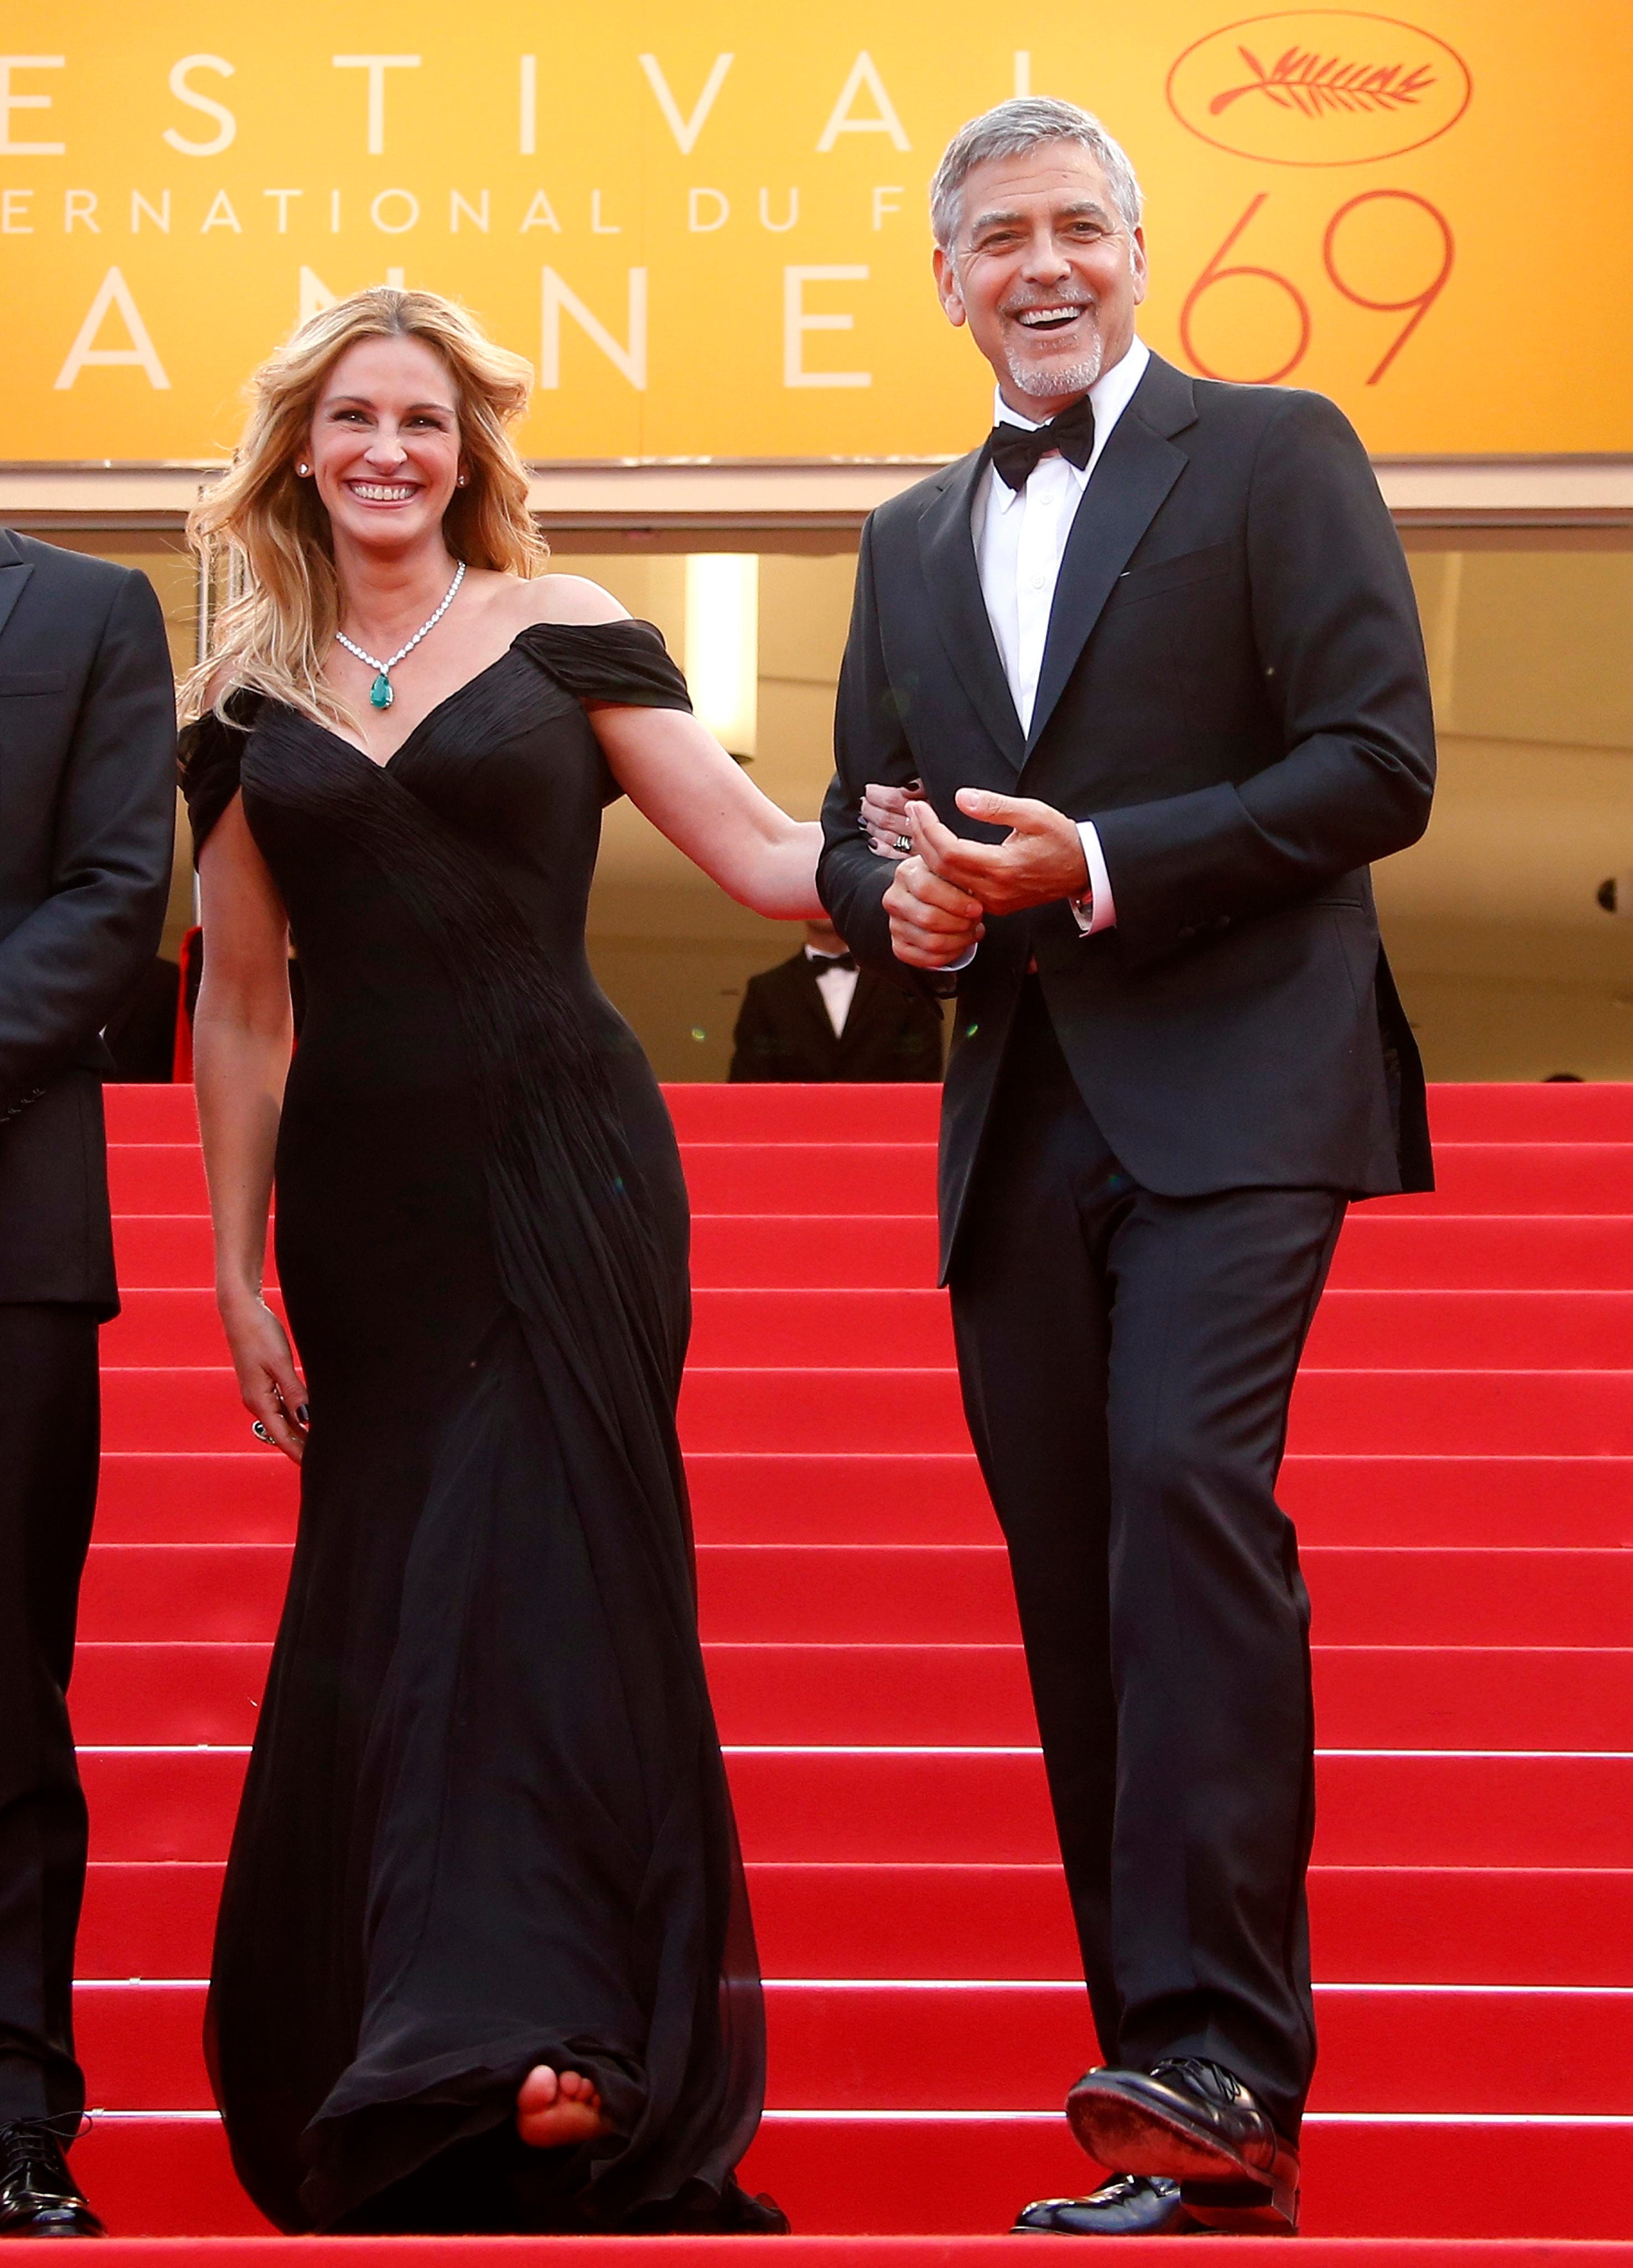 Shoeless! Julia Roberts walked the Cannes carpet in bare feet | 11alive.com